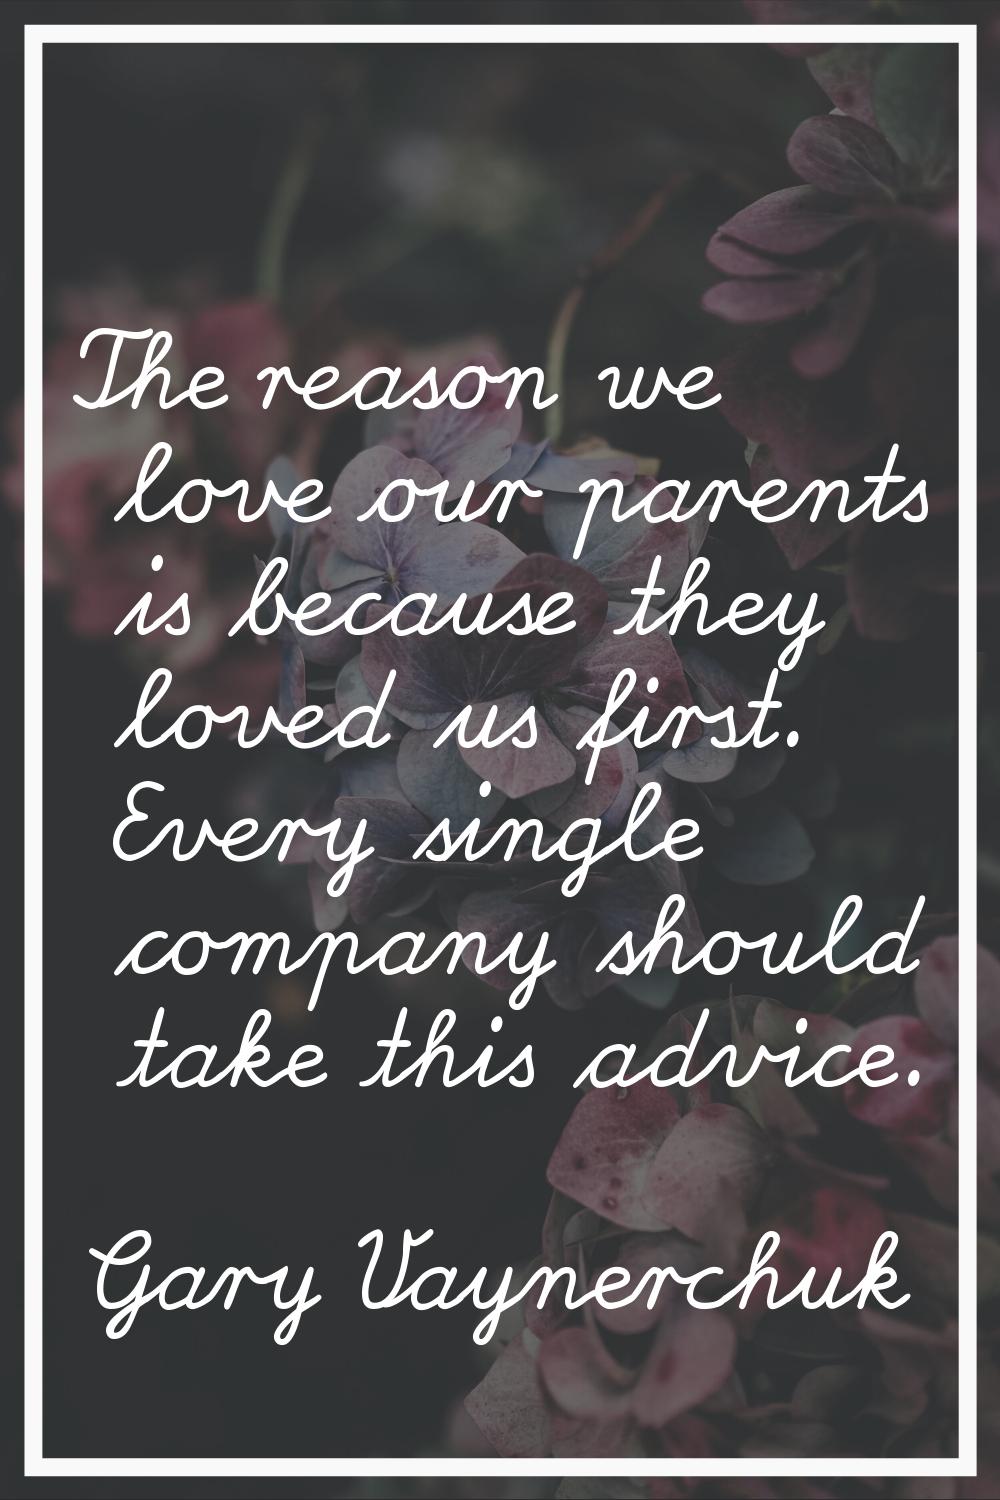 The reason we love our parents is because they loved us first. Every single company should take thi